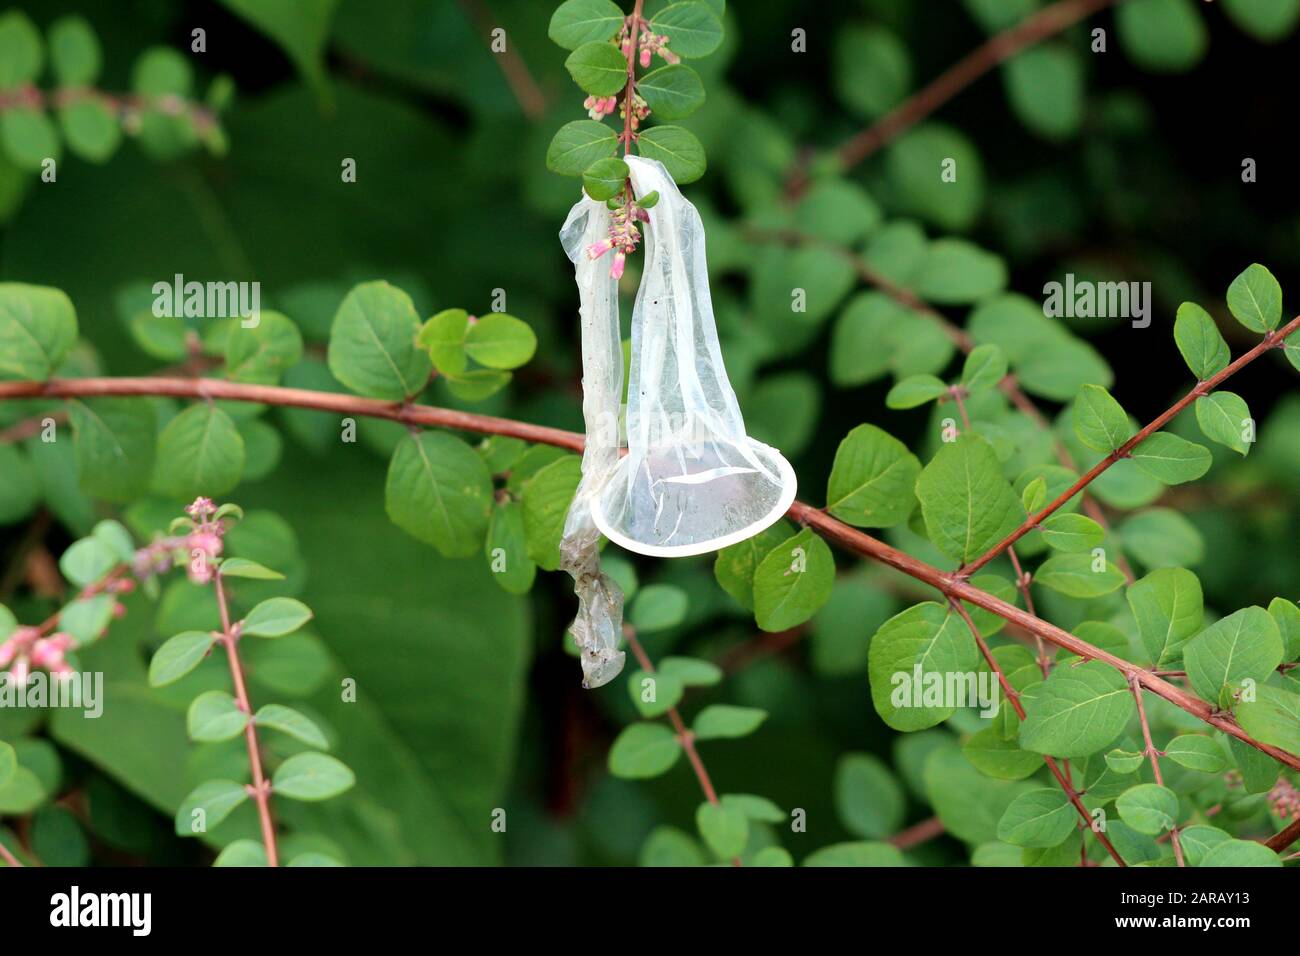 Used discarded condom left as garbage in public park on tree branches after use on hot summer night Stock Photo